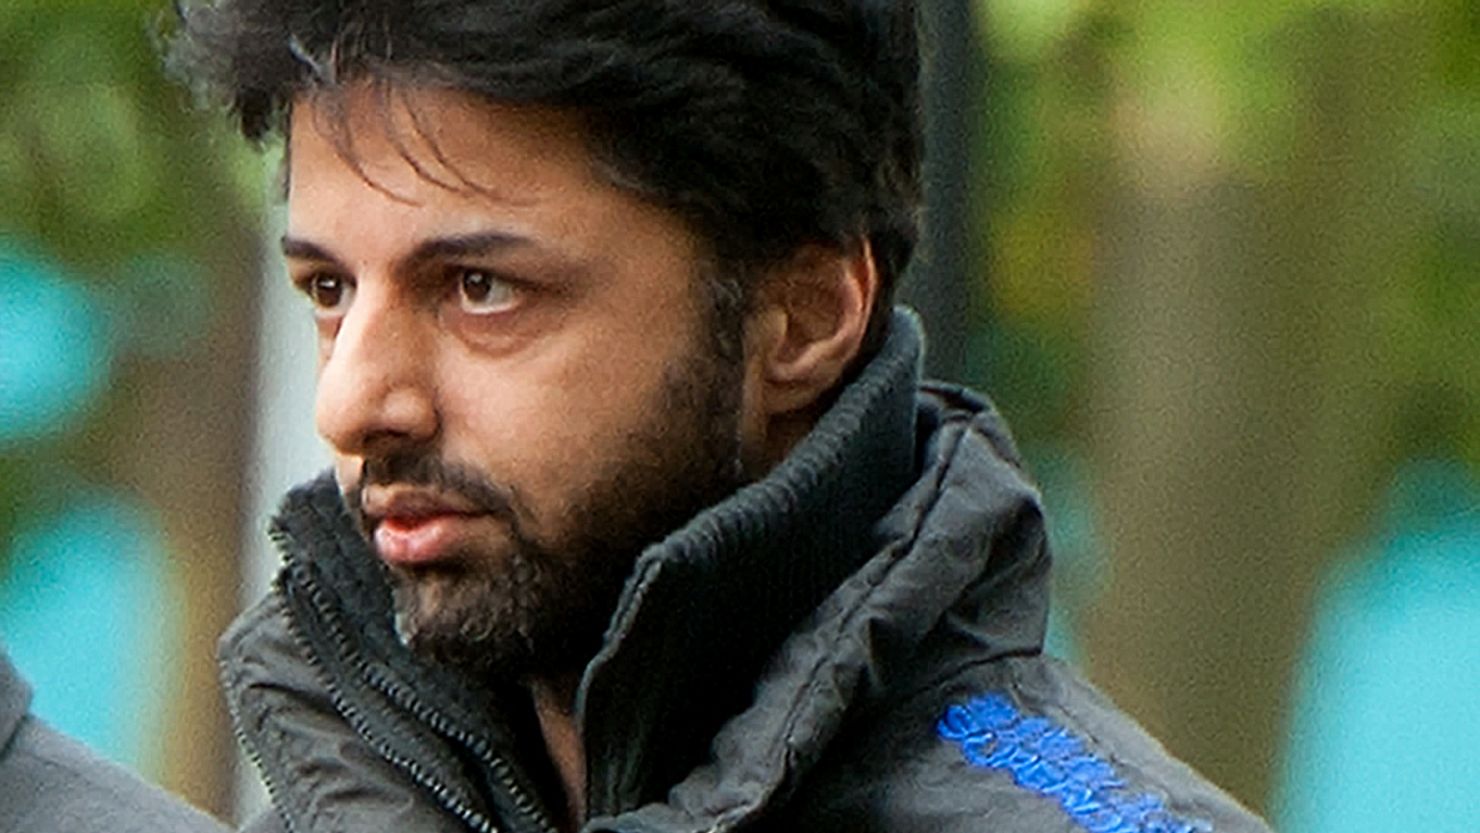 Shrien Dewani is accused of hiring hitmen to kill his wife while the couple were on honeymoon in South Africa.